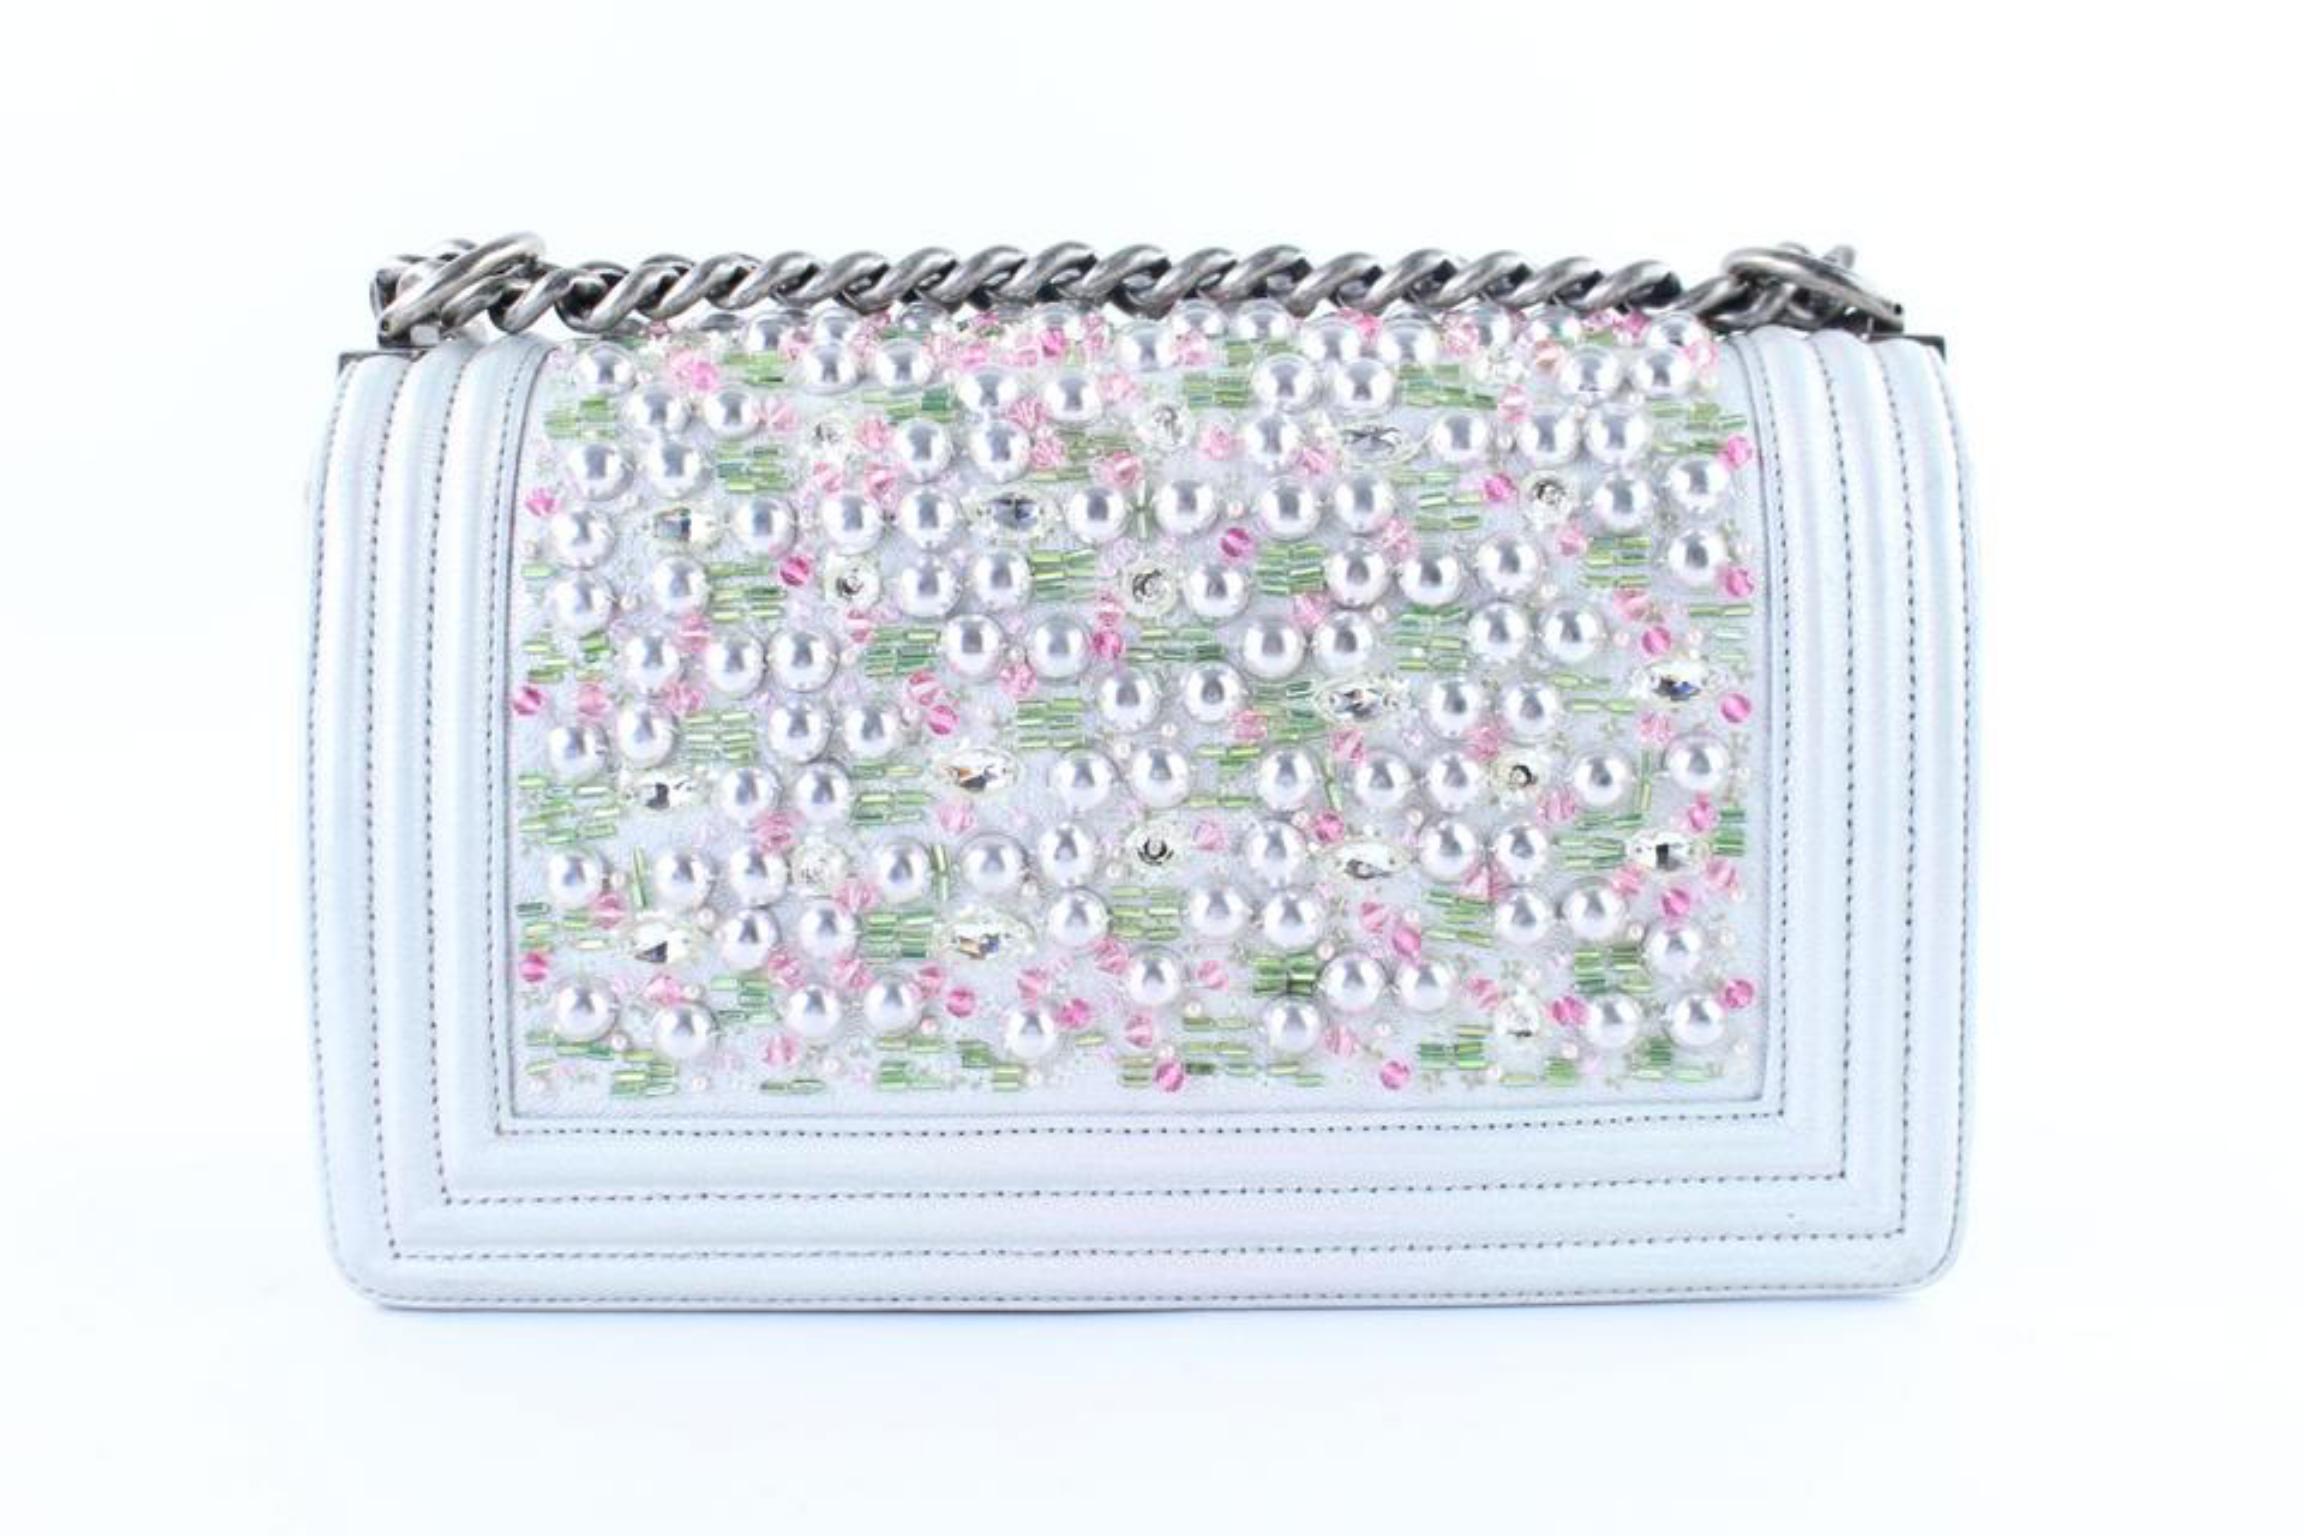 Chanel Boy Tweed and Pearl 2cr0103 Metallic Silver Leather Cross Body Bag For Sale 4